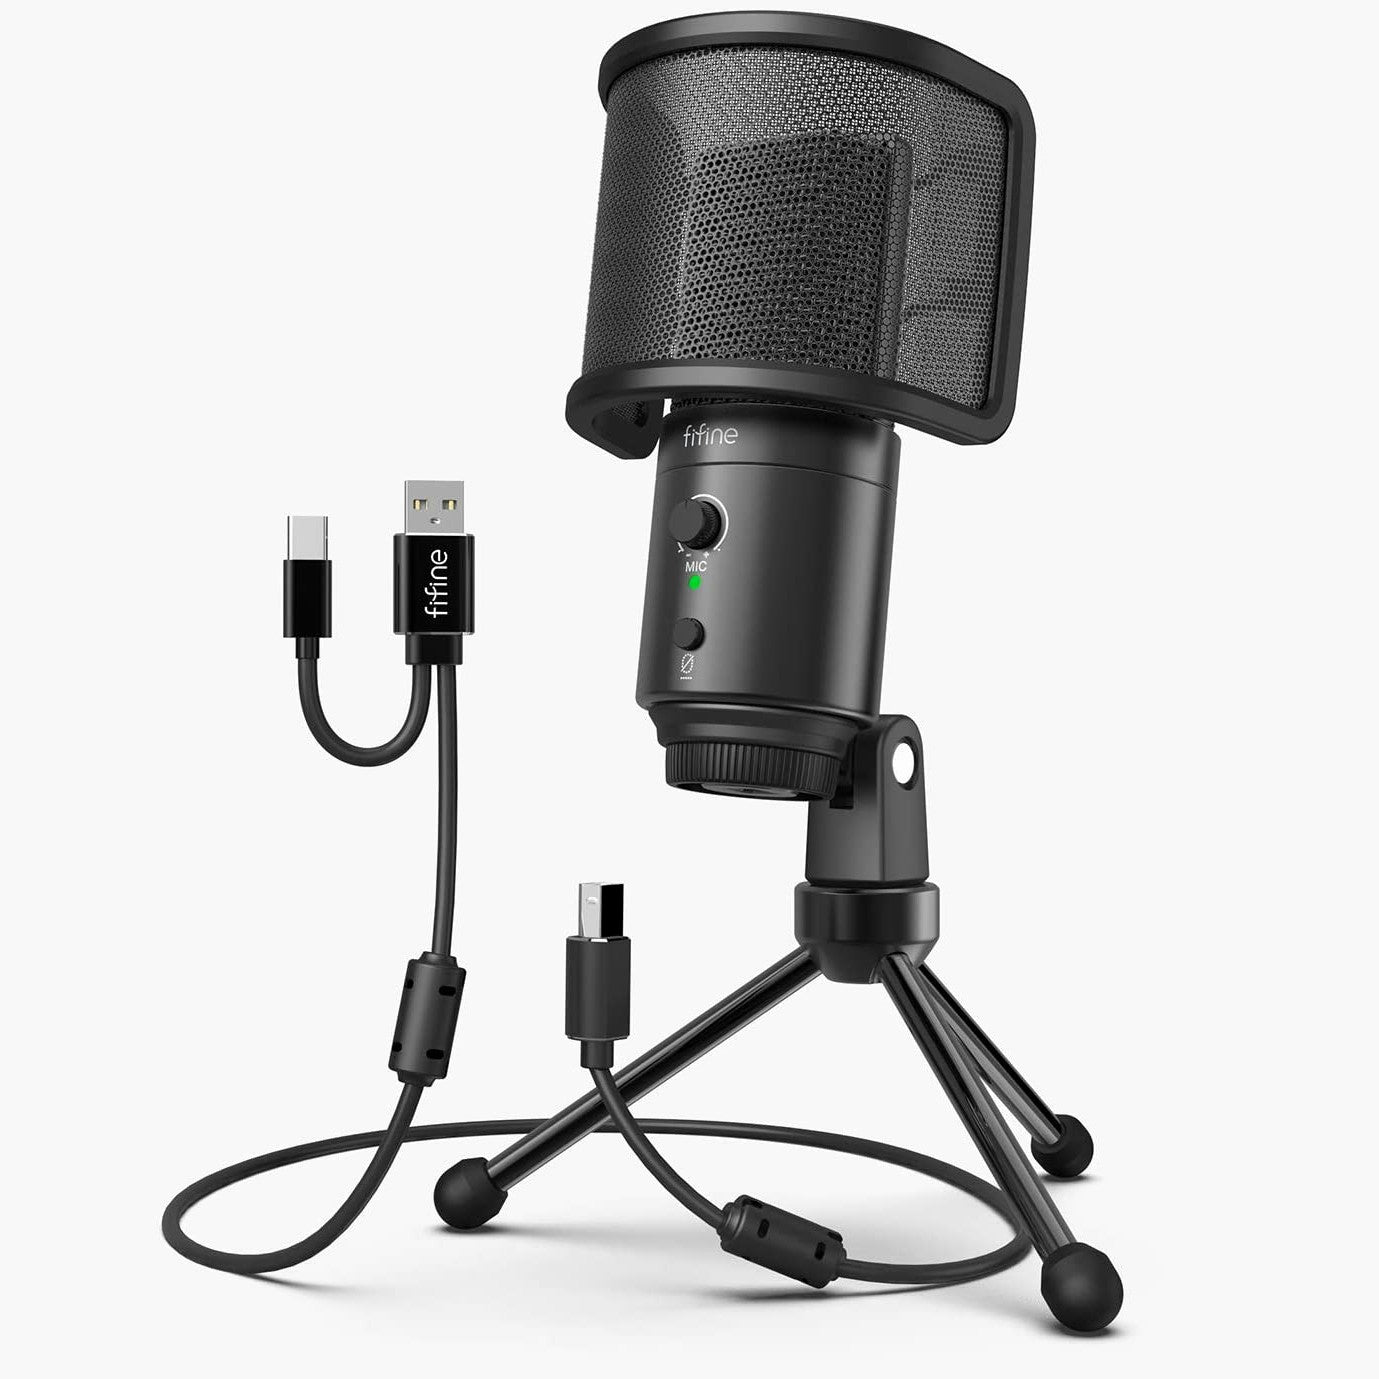 FIFINE AmpliGame USB Microphone with Volume Dial, Mute Button